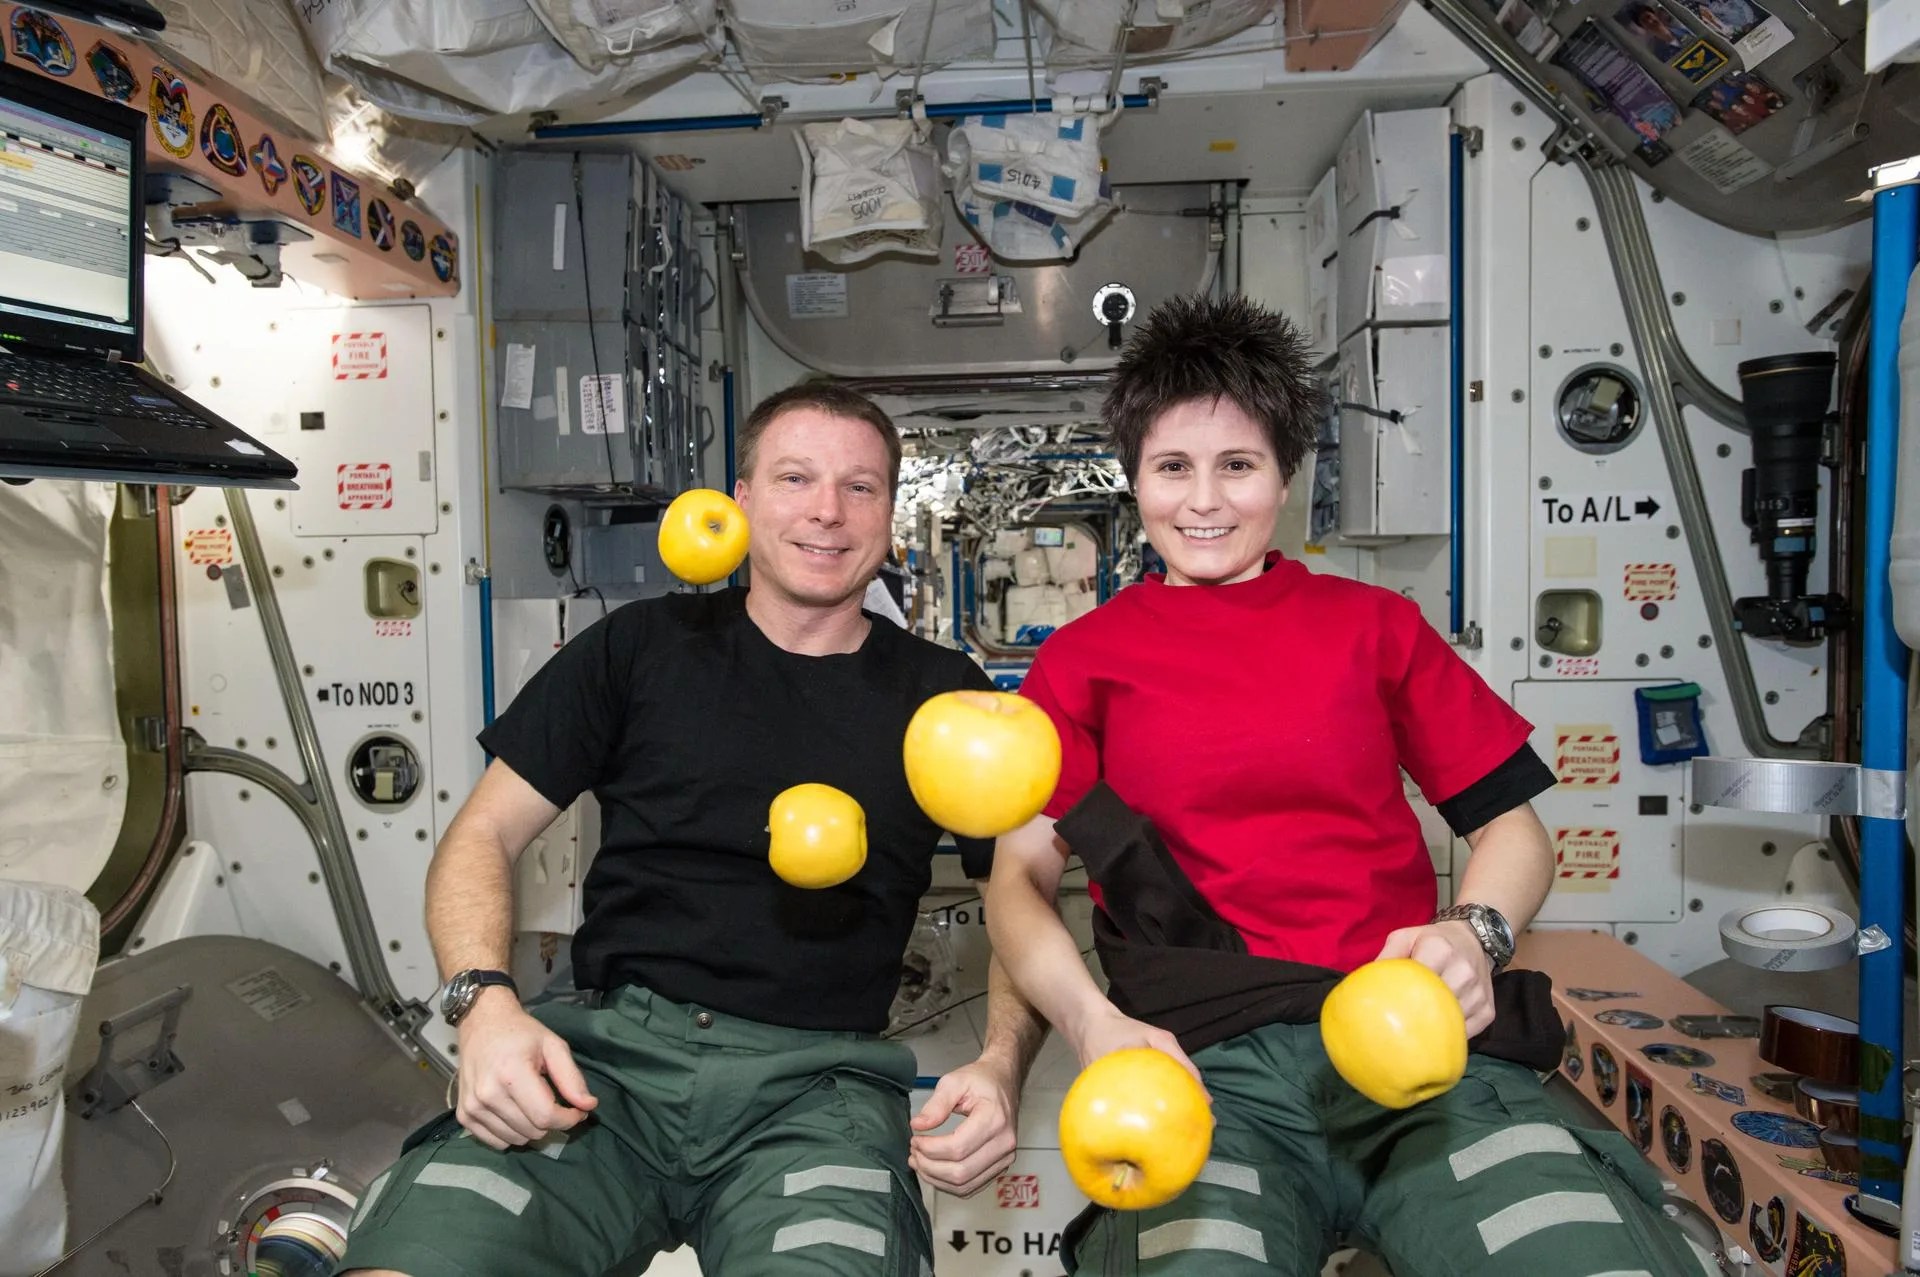 Man on left in black shirt and woman on right in red shirt smile as they watch five yellow apples float weightlessly in the foreground.